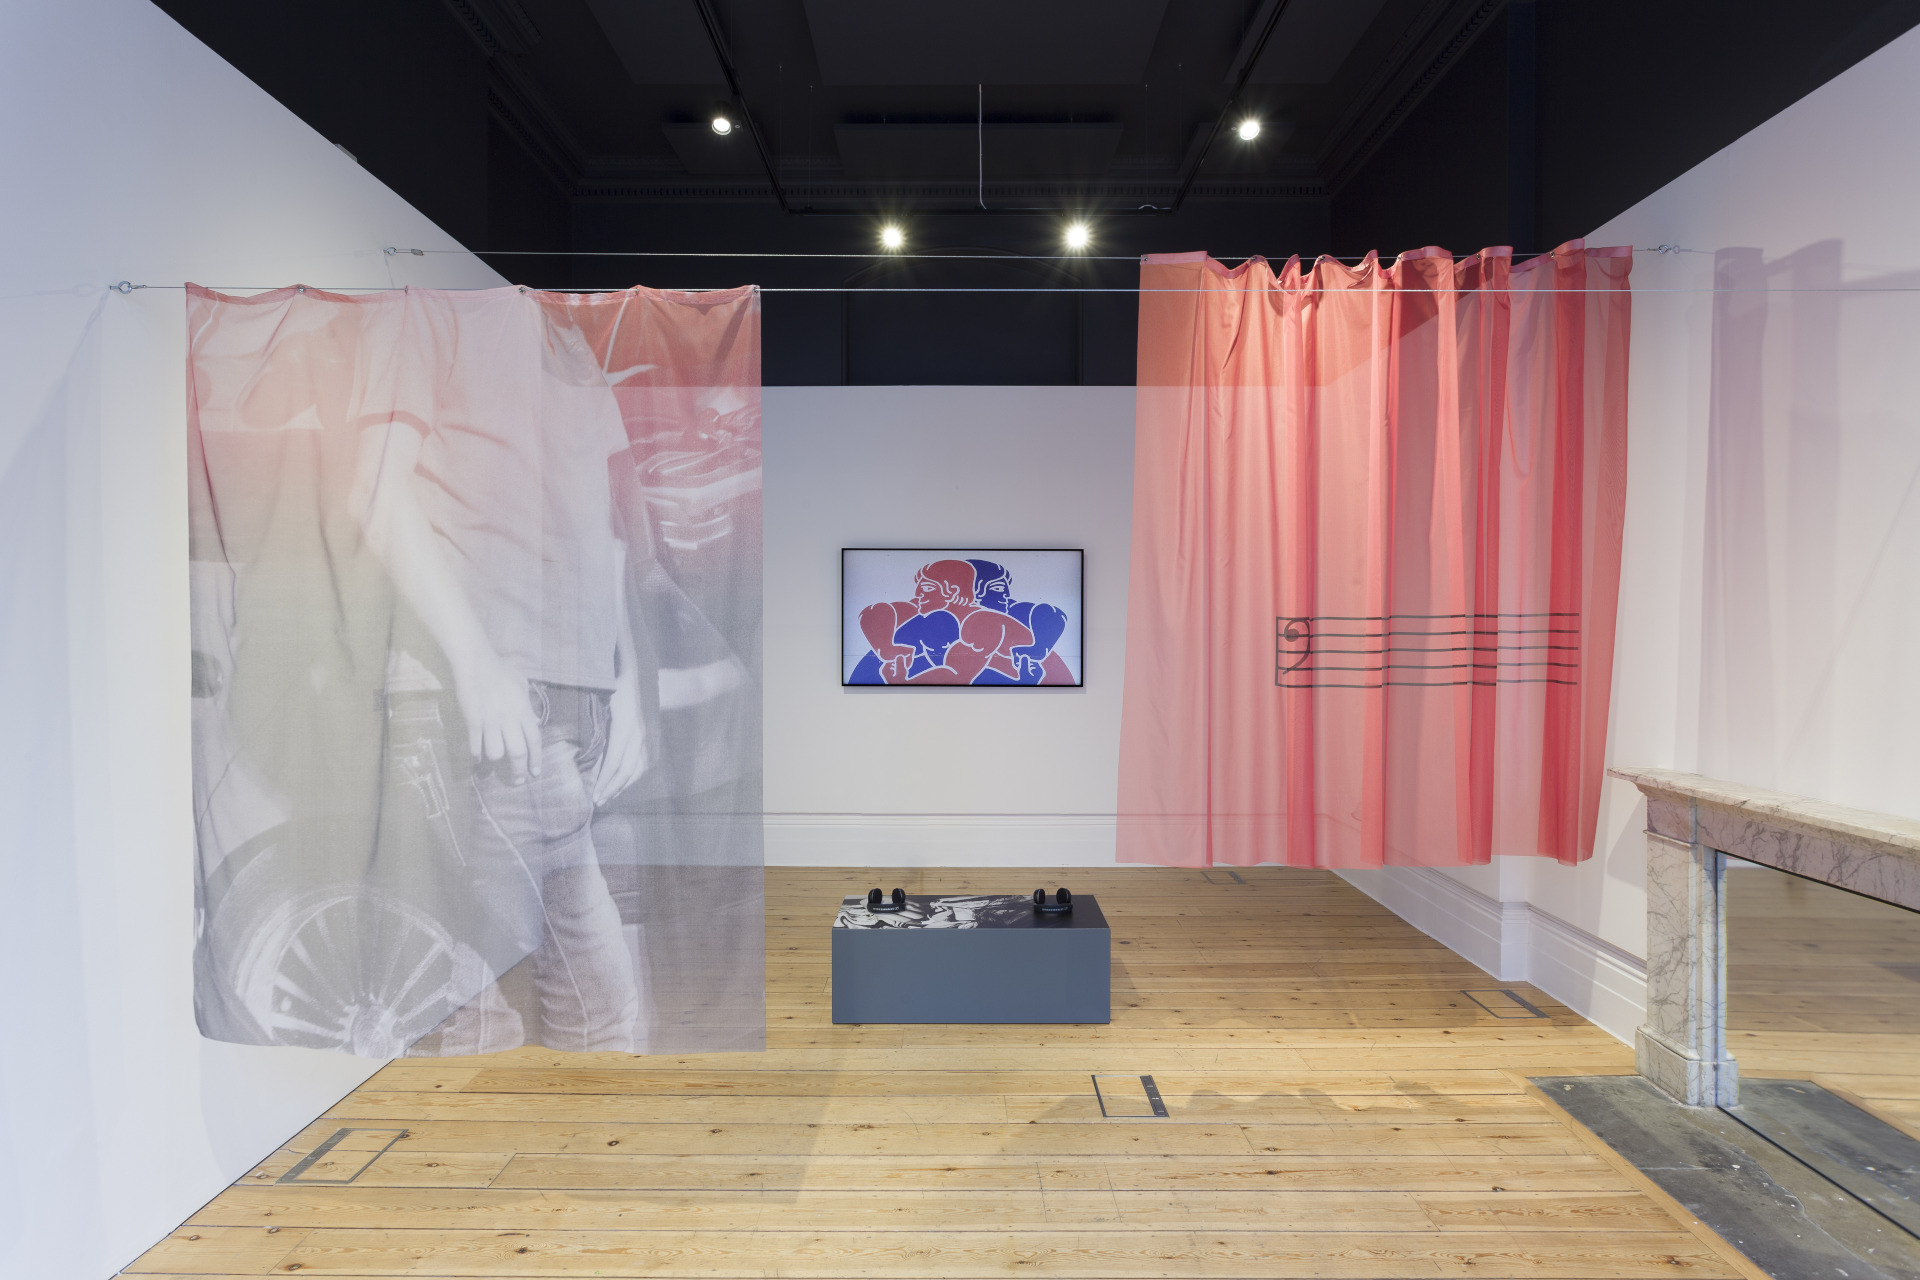 Installation views of Gallery 31: Temporary Compositions